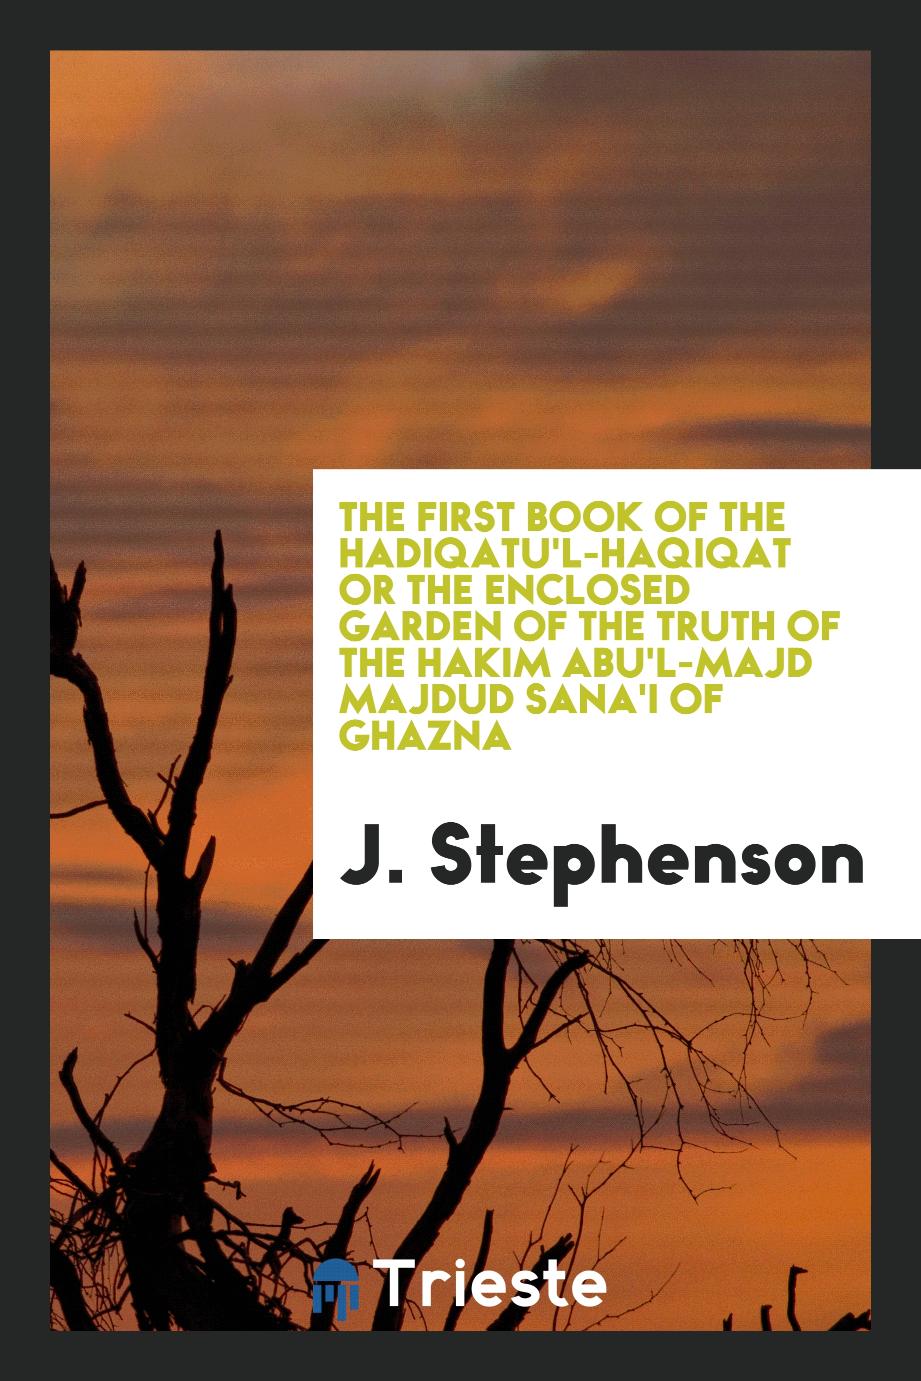 The first book of the Hadiqatu'l-Haqiqat or the enclosed garden of the truth of the Hakim Abu'l-Majd Majdud Sana'i of Ghazna